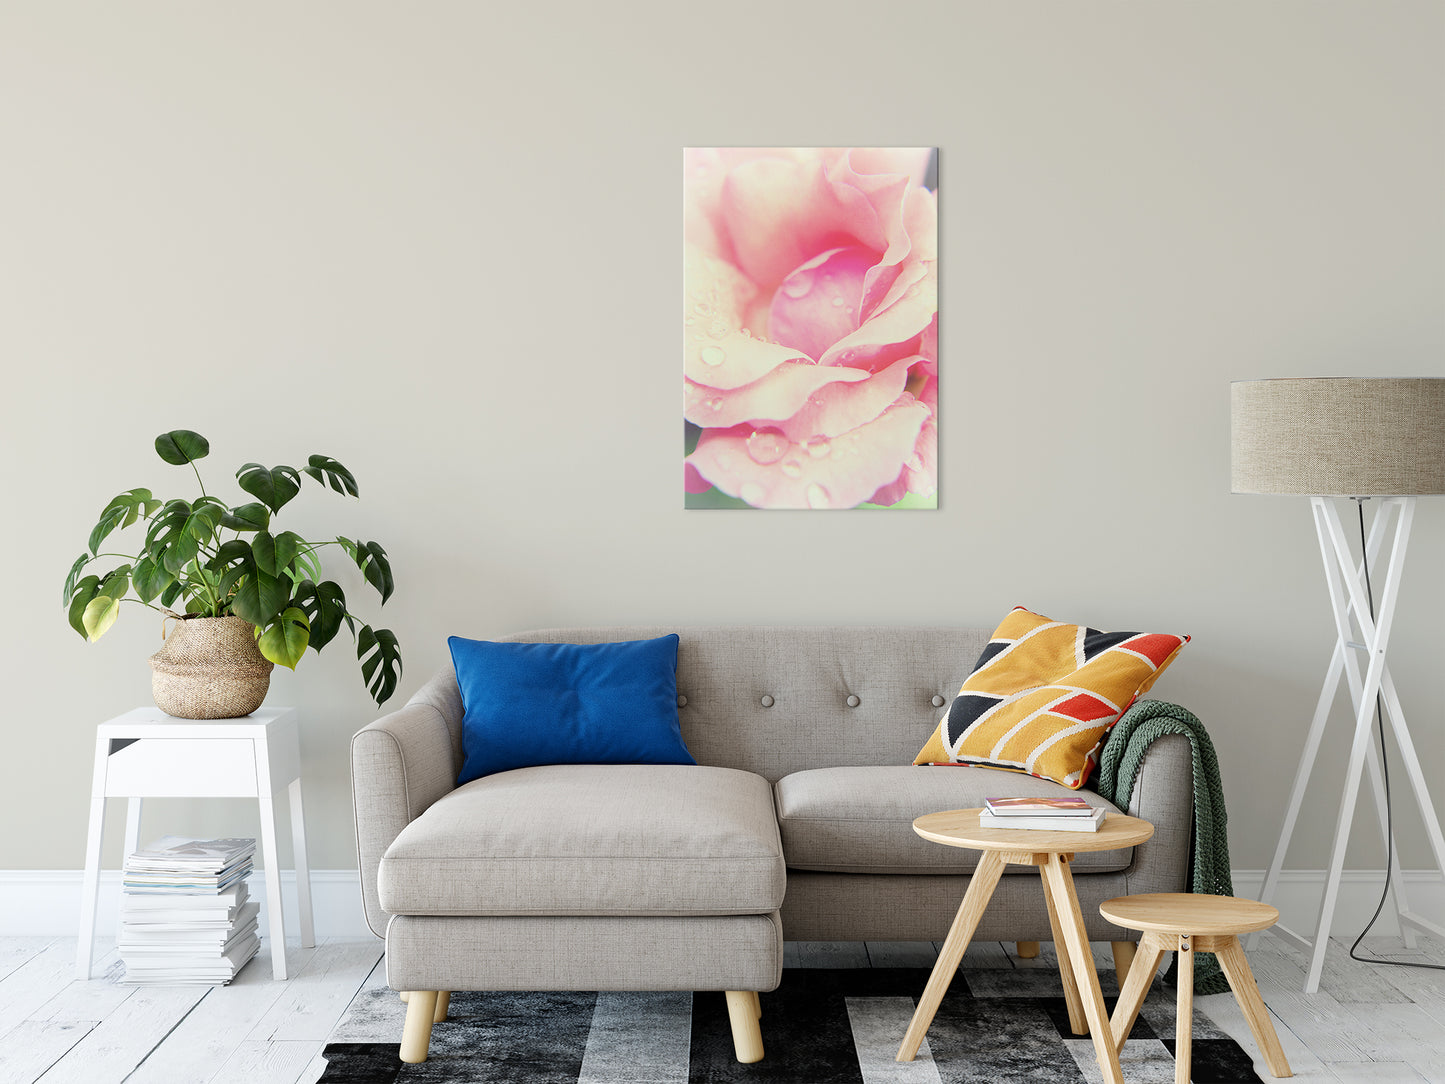 Softened Rose Nature / Floral Photo Fine Art Canvas Wall Art Prints 24" x 36" - PIPAFINEART